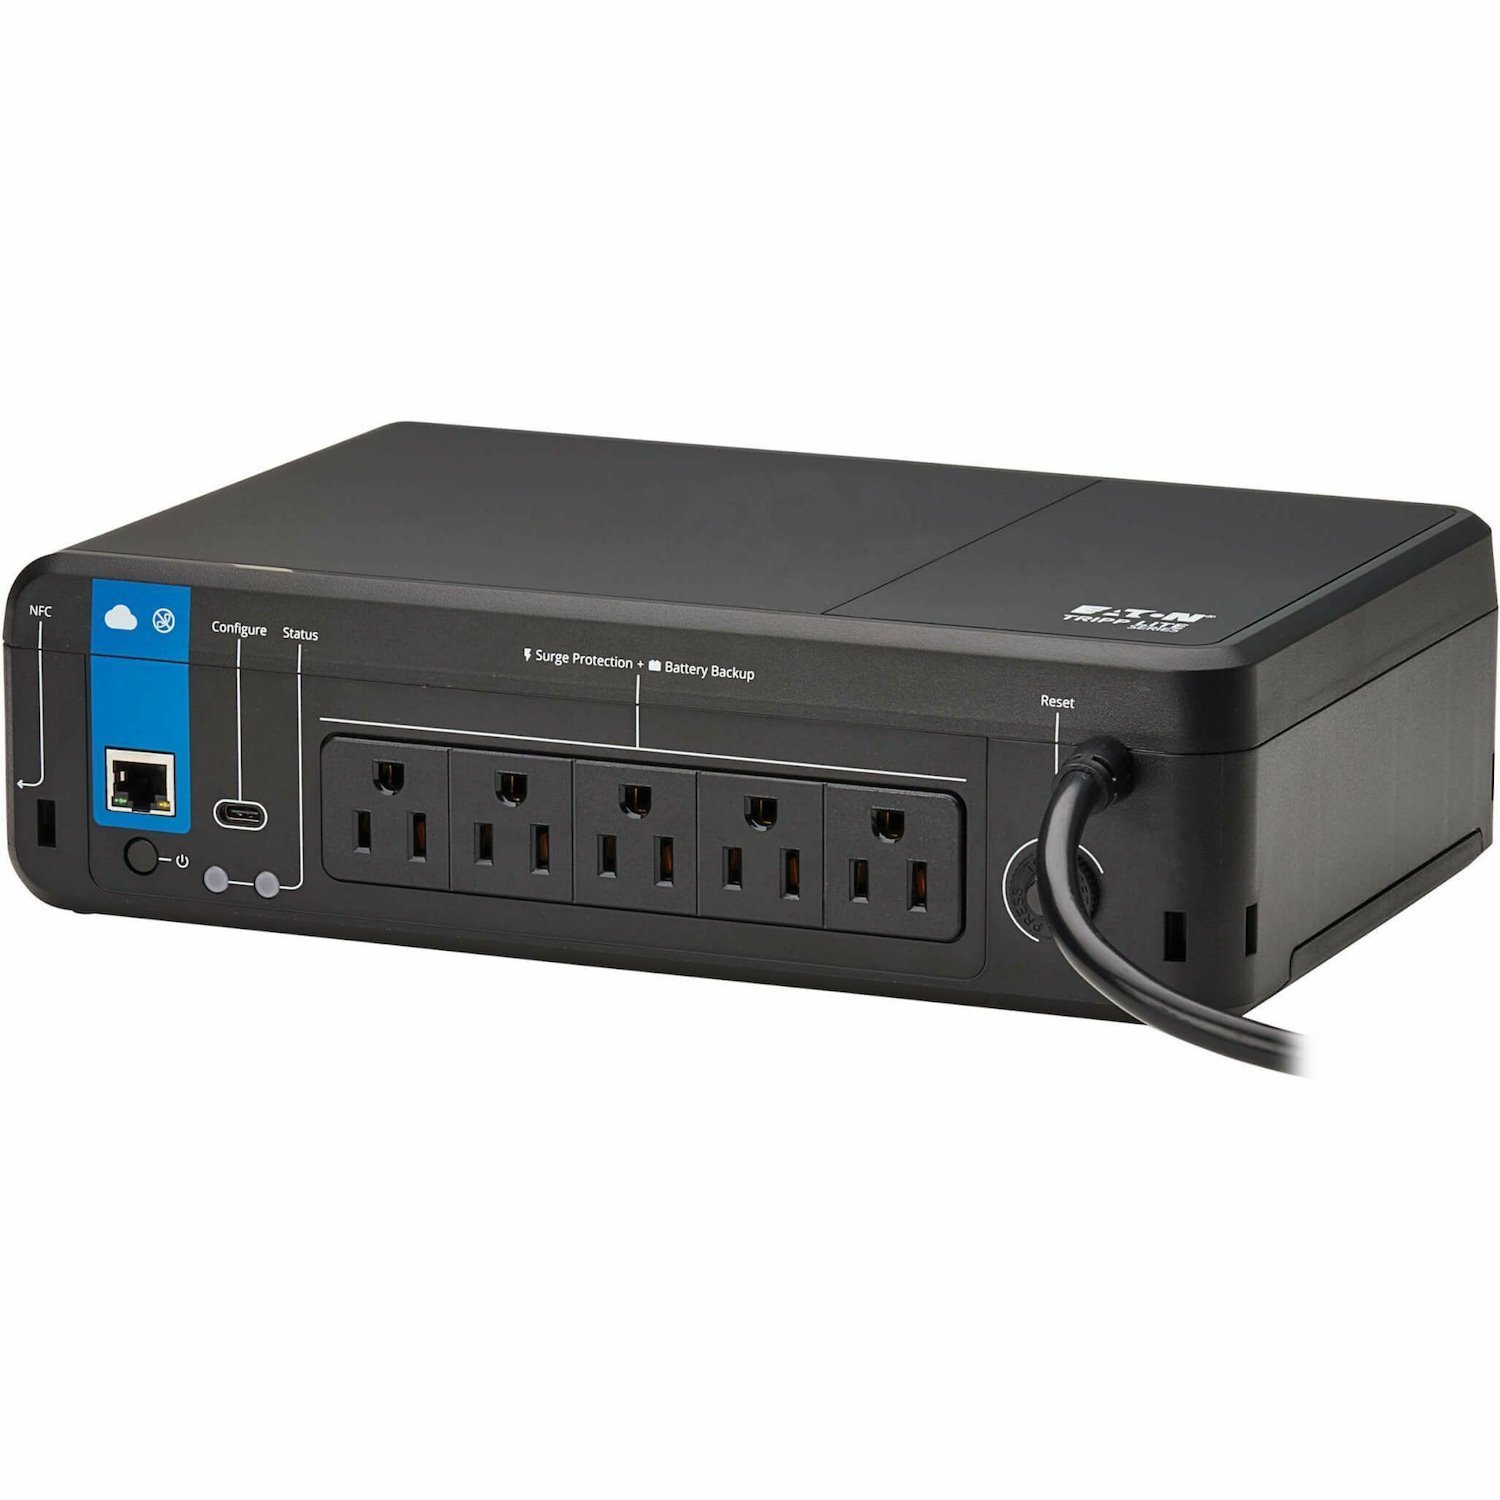 Eaton Tripp Lite Series 850VA 450W 120V Standby Cloud-Connected UPS with Remote Monitoring 5 NEMA 5-15R Battery Backup